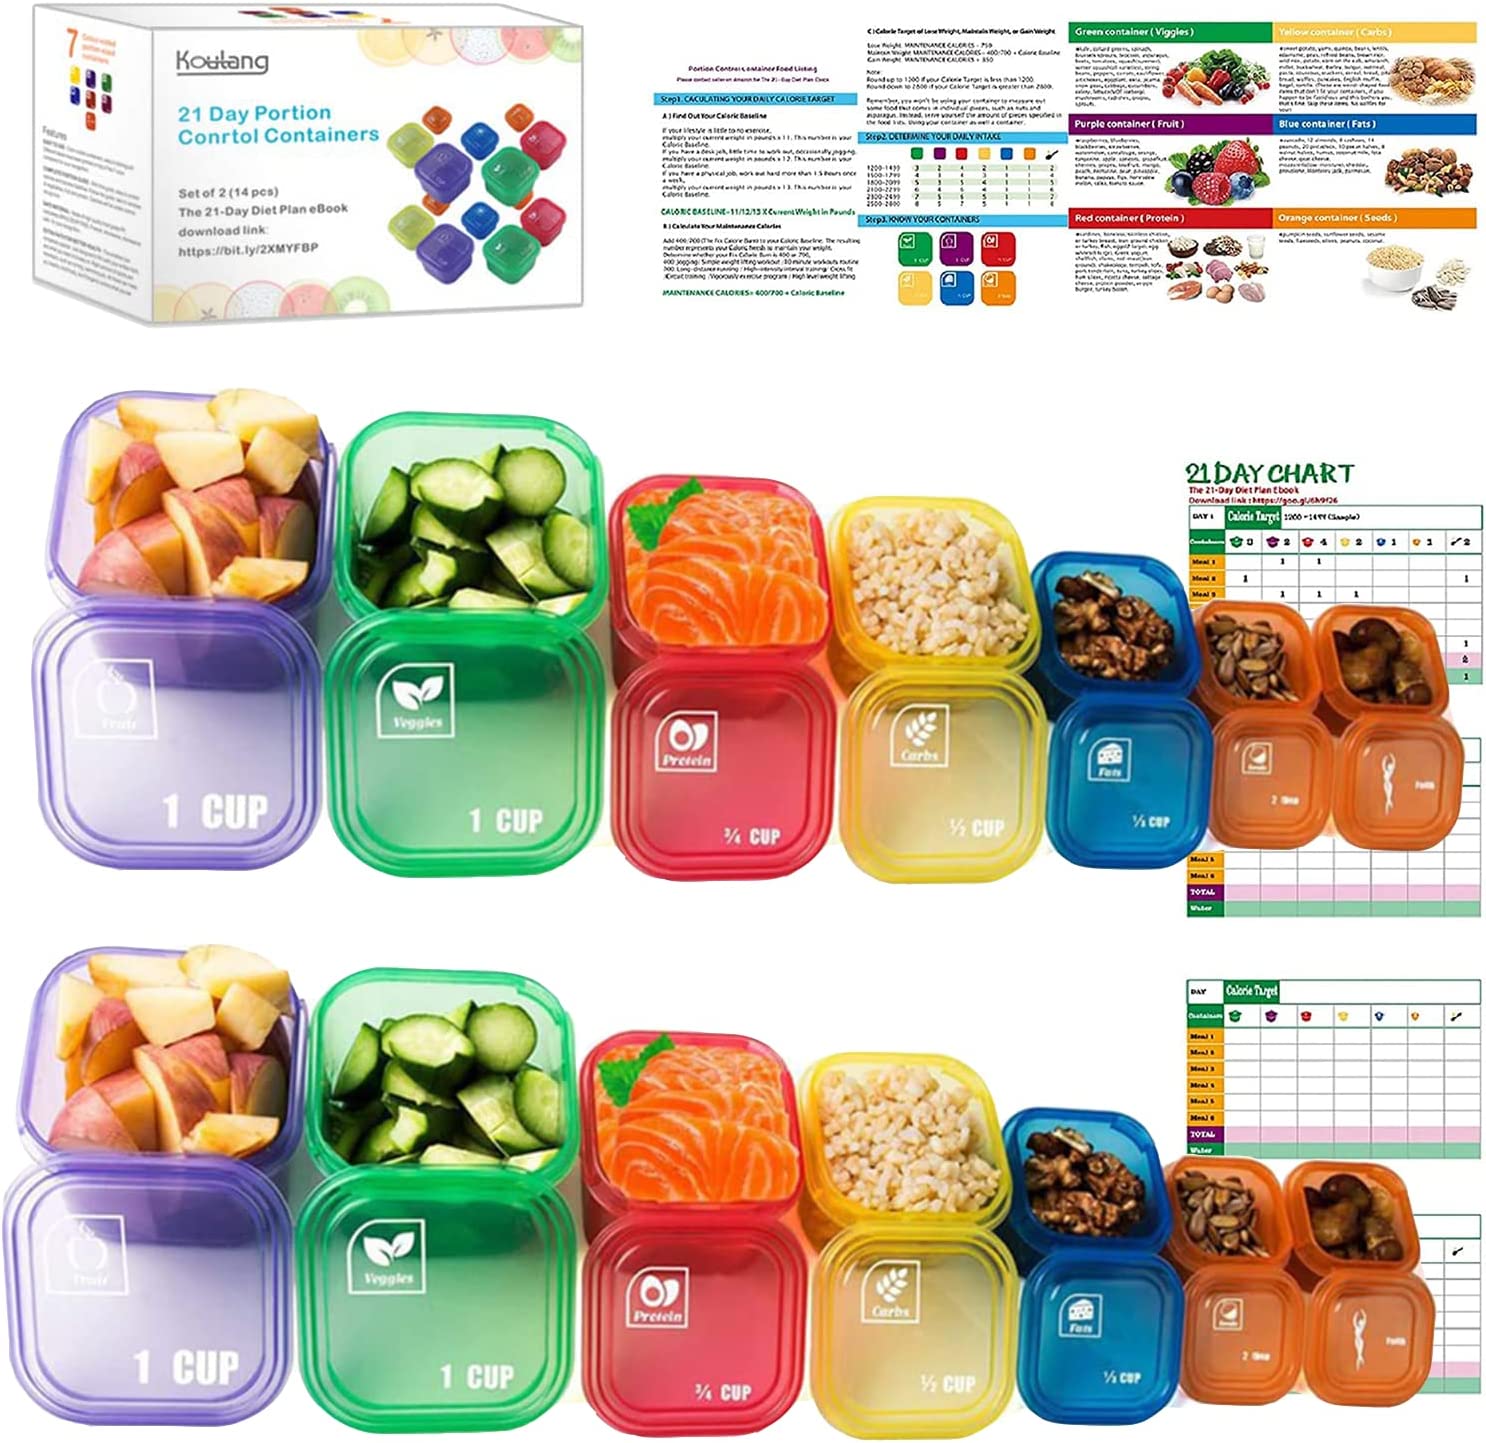 Koulang 21 Day Portion Control Container Kit – 14 Pieces BPA Free Food Portion Container Multi-Color Coded and Label-Engraved for Diet Plans, Lose Weight with eBook… (colorful)